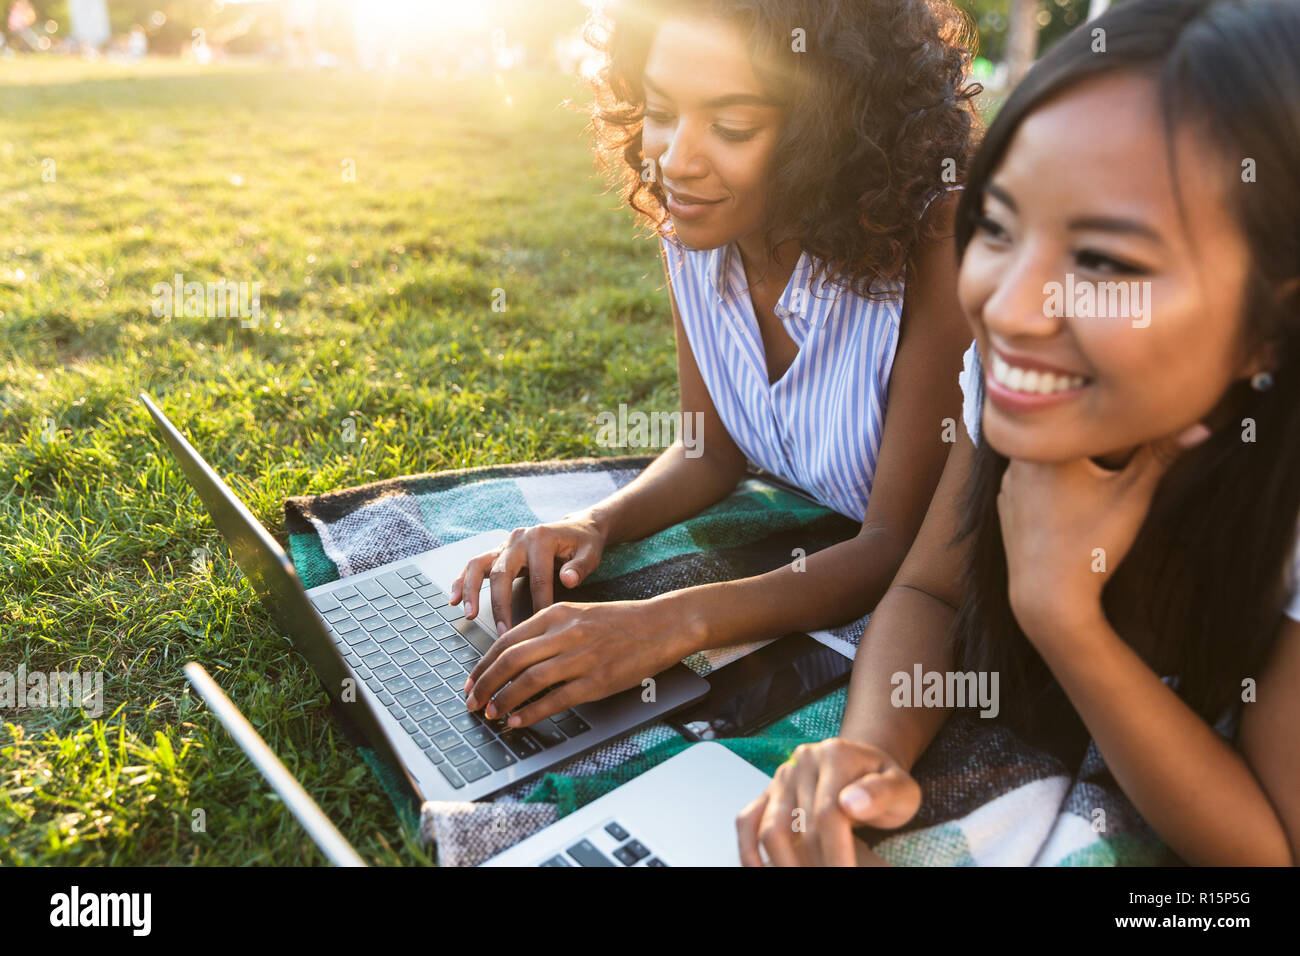 Image of happy smiling young friends girls outdoors in park using laptop computers. Stock Photo